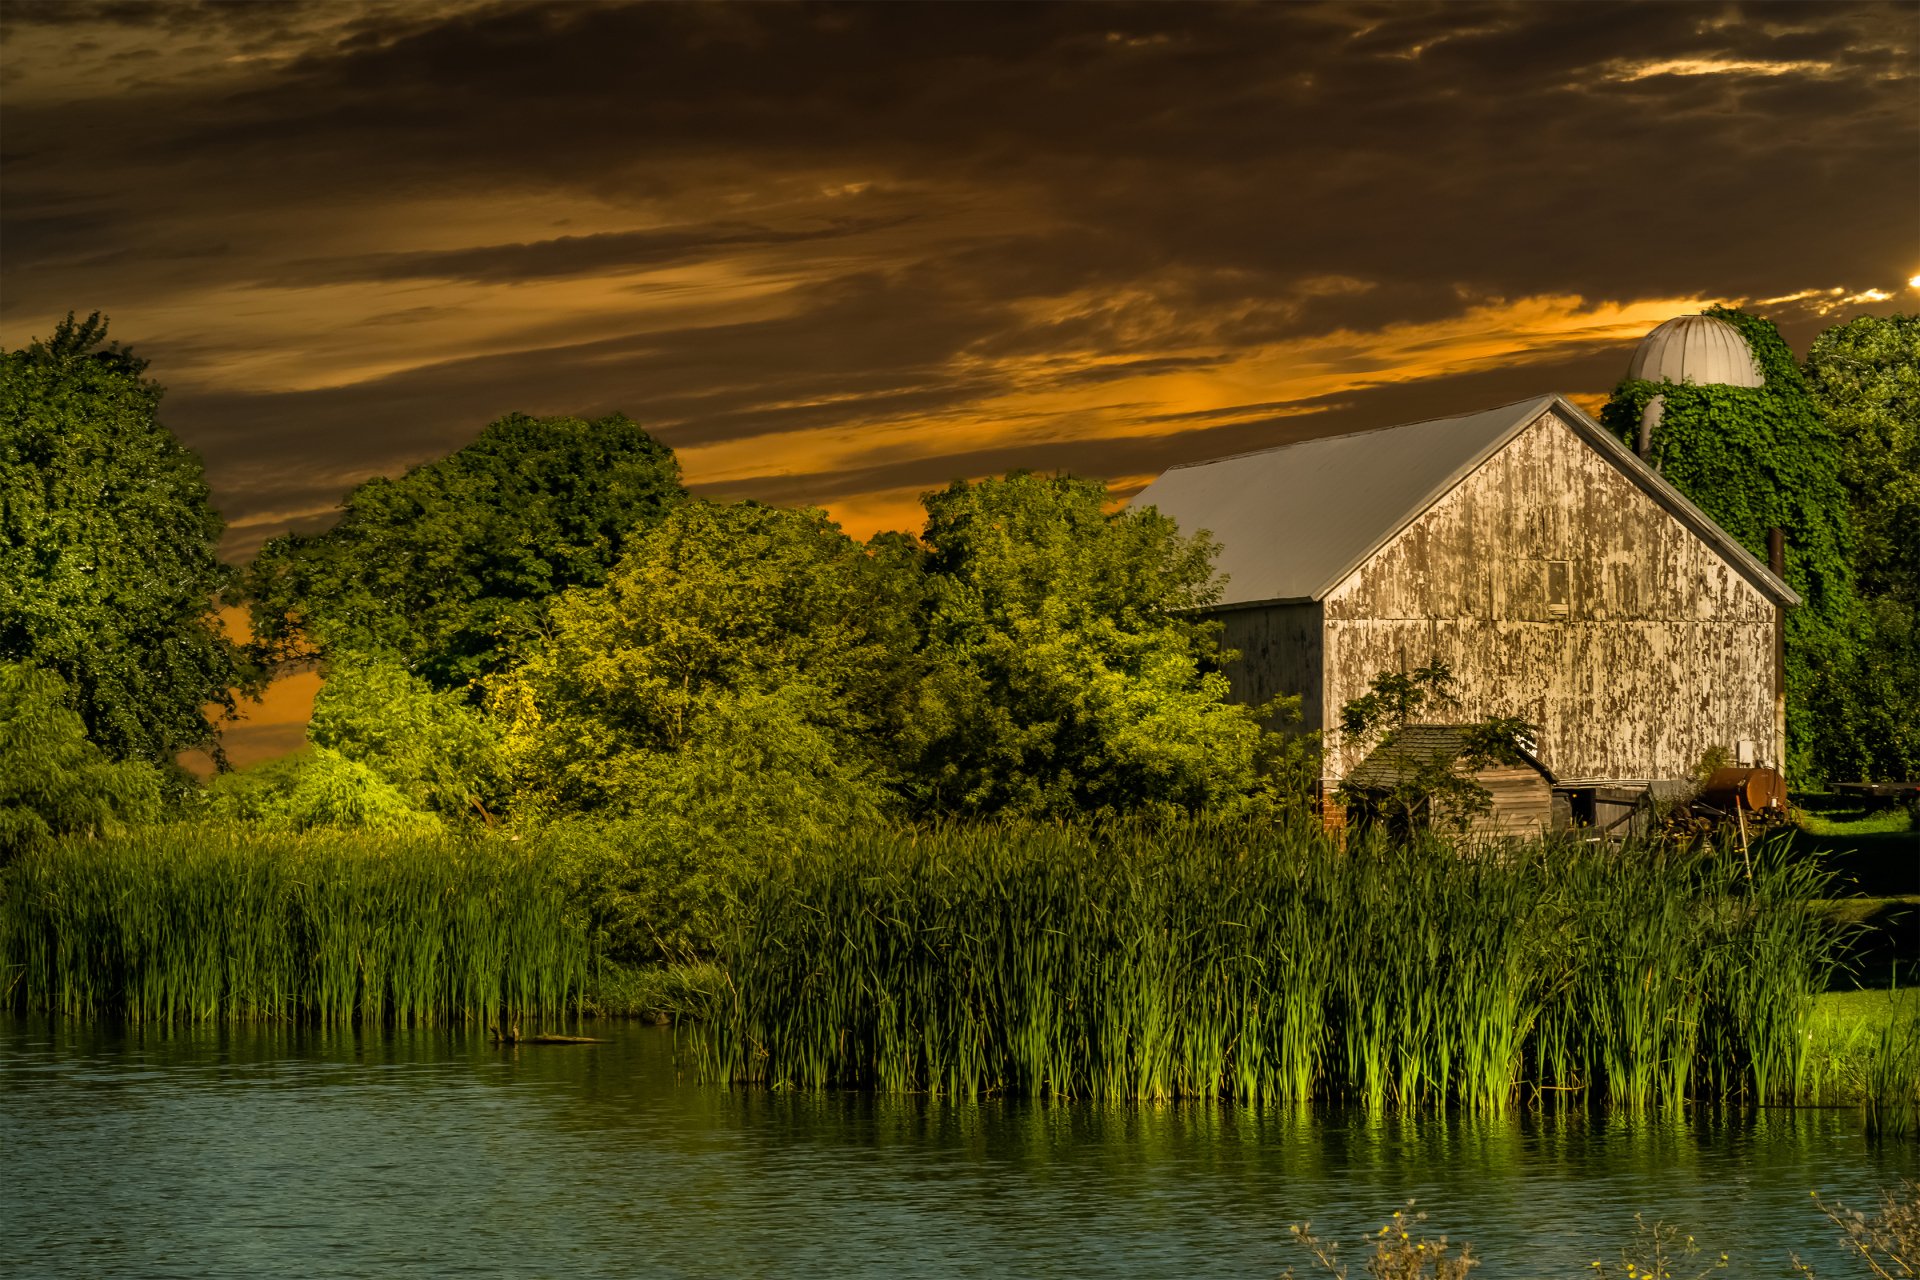 What is the title of this picture ? Sunset over Farm and River HD Wallpaper | Background Image | 3360x2240